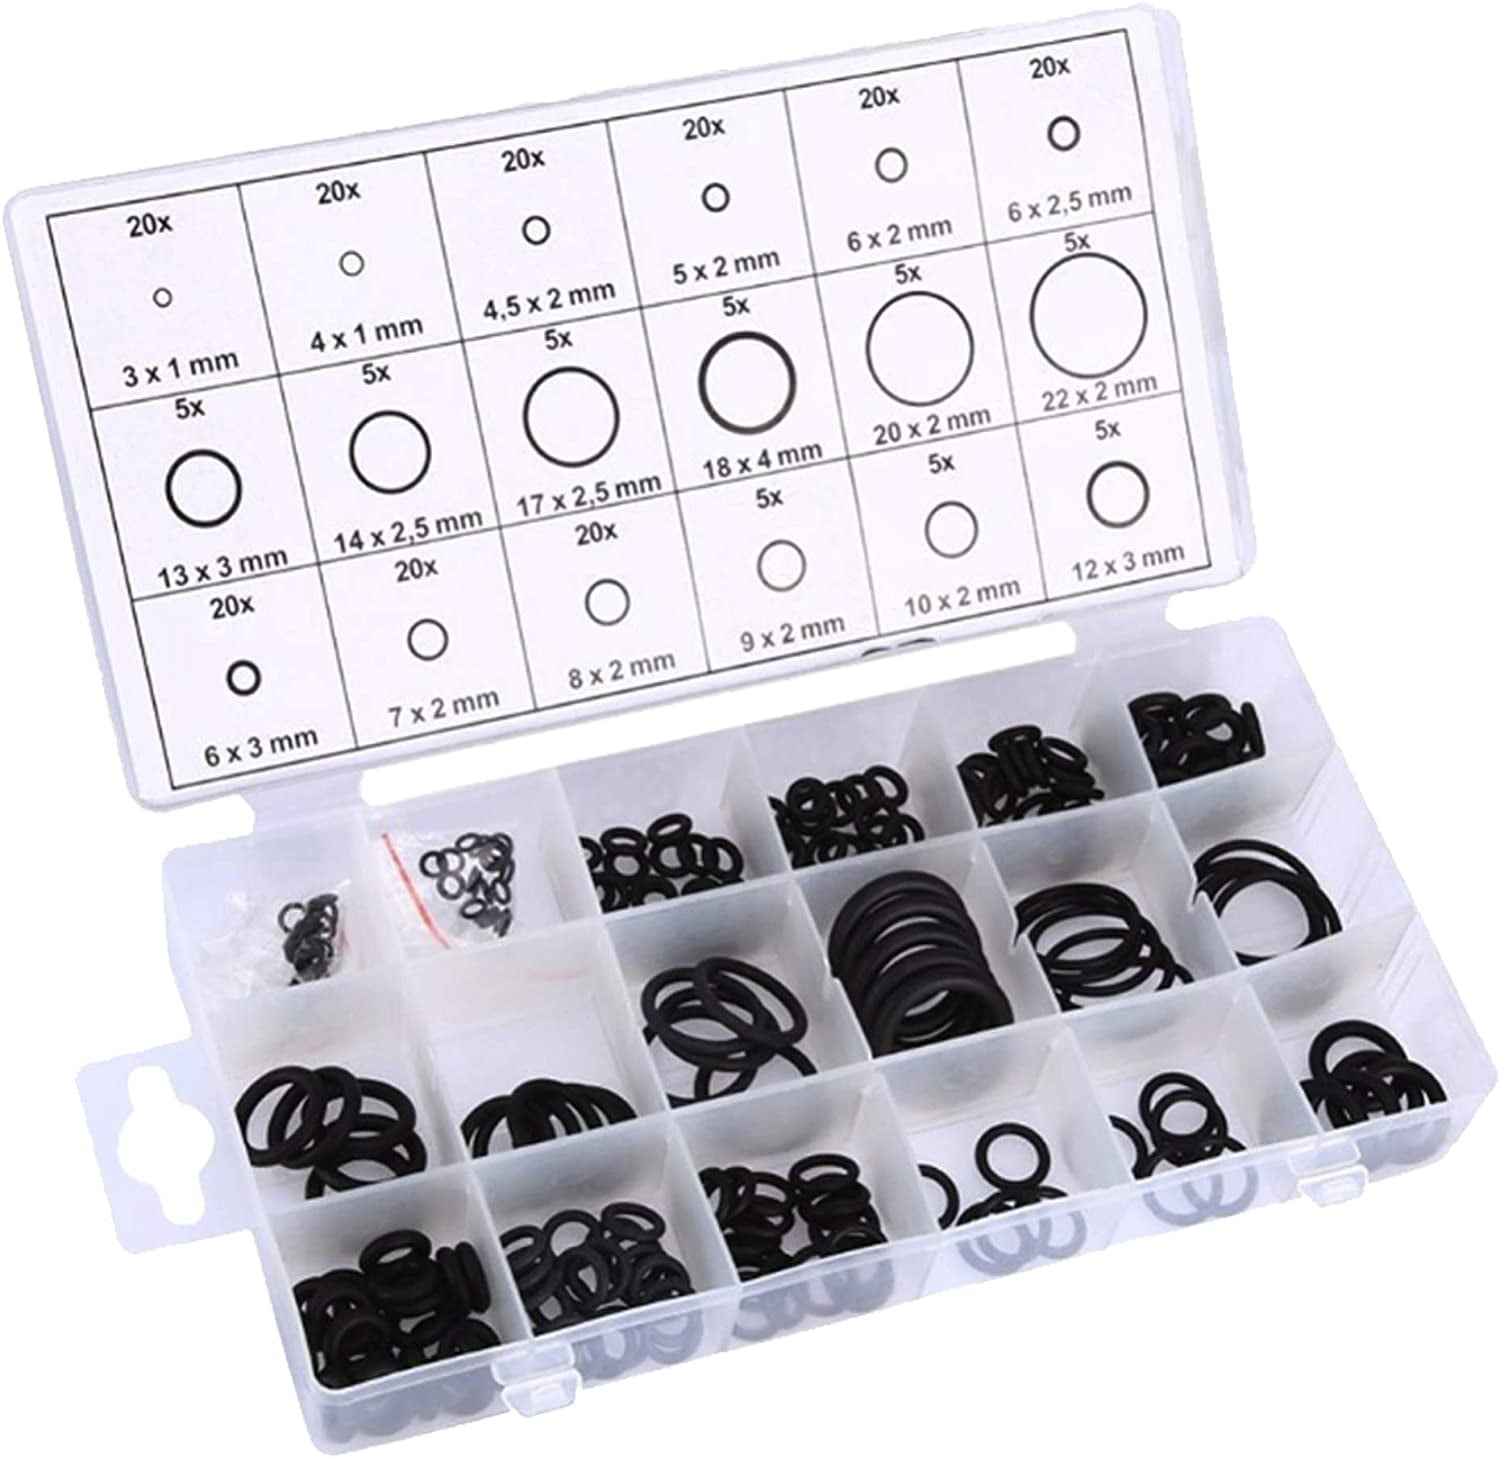 Silicone Rubber O-Ring Assortment Kit 225 Pieces Seal Gasket Set 